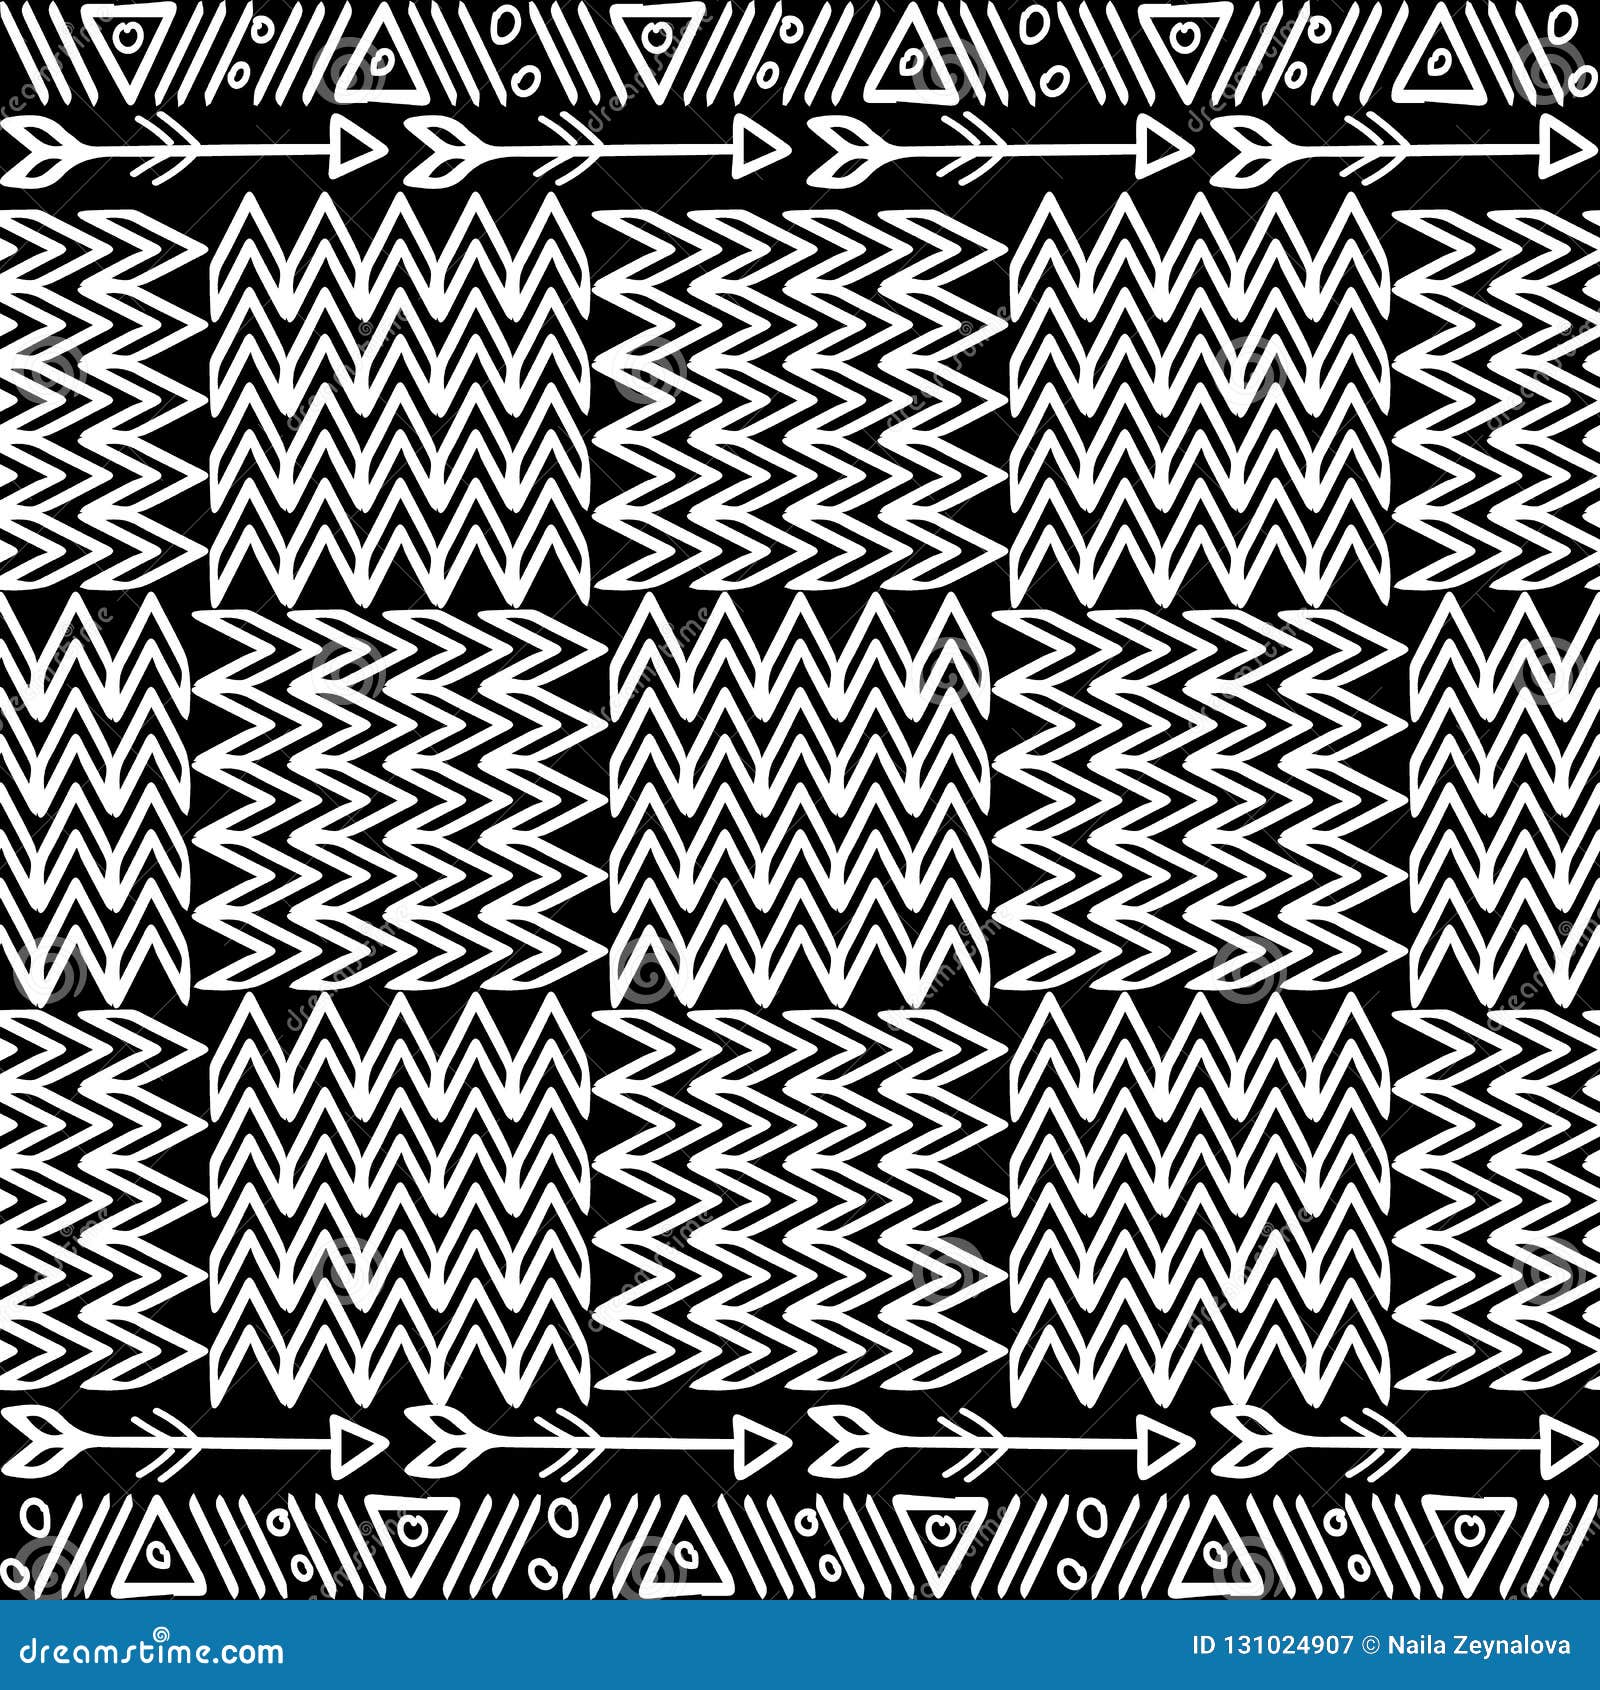 Tribal Apache Style Vector Seamless Pattern. Black and White Ornamental ...